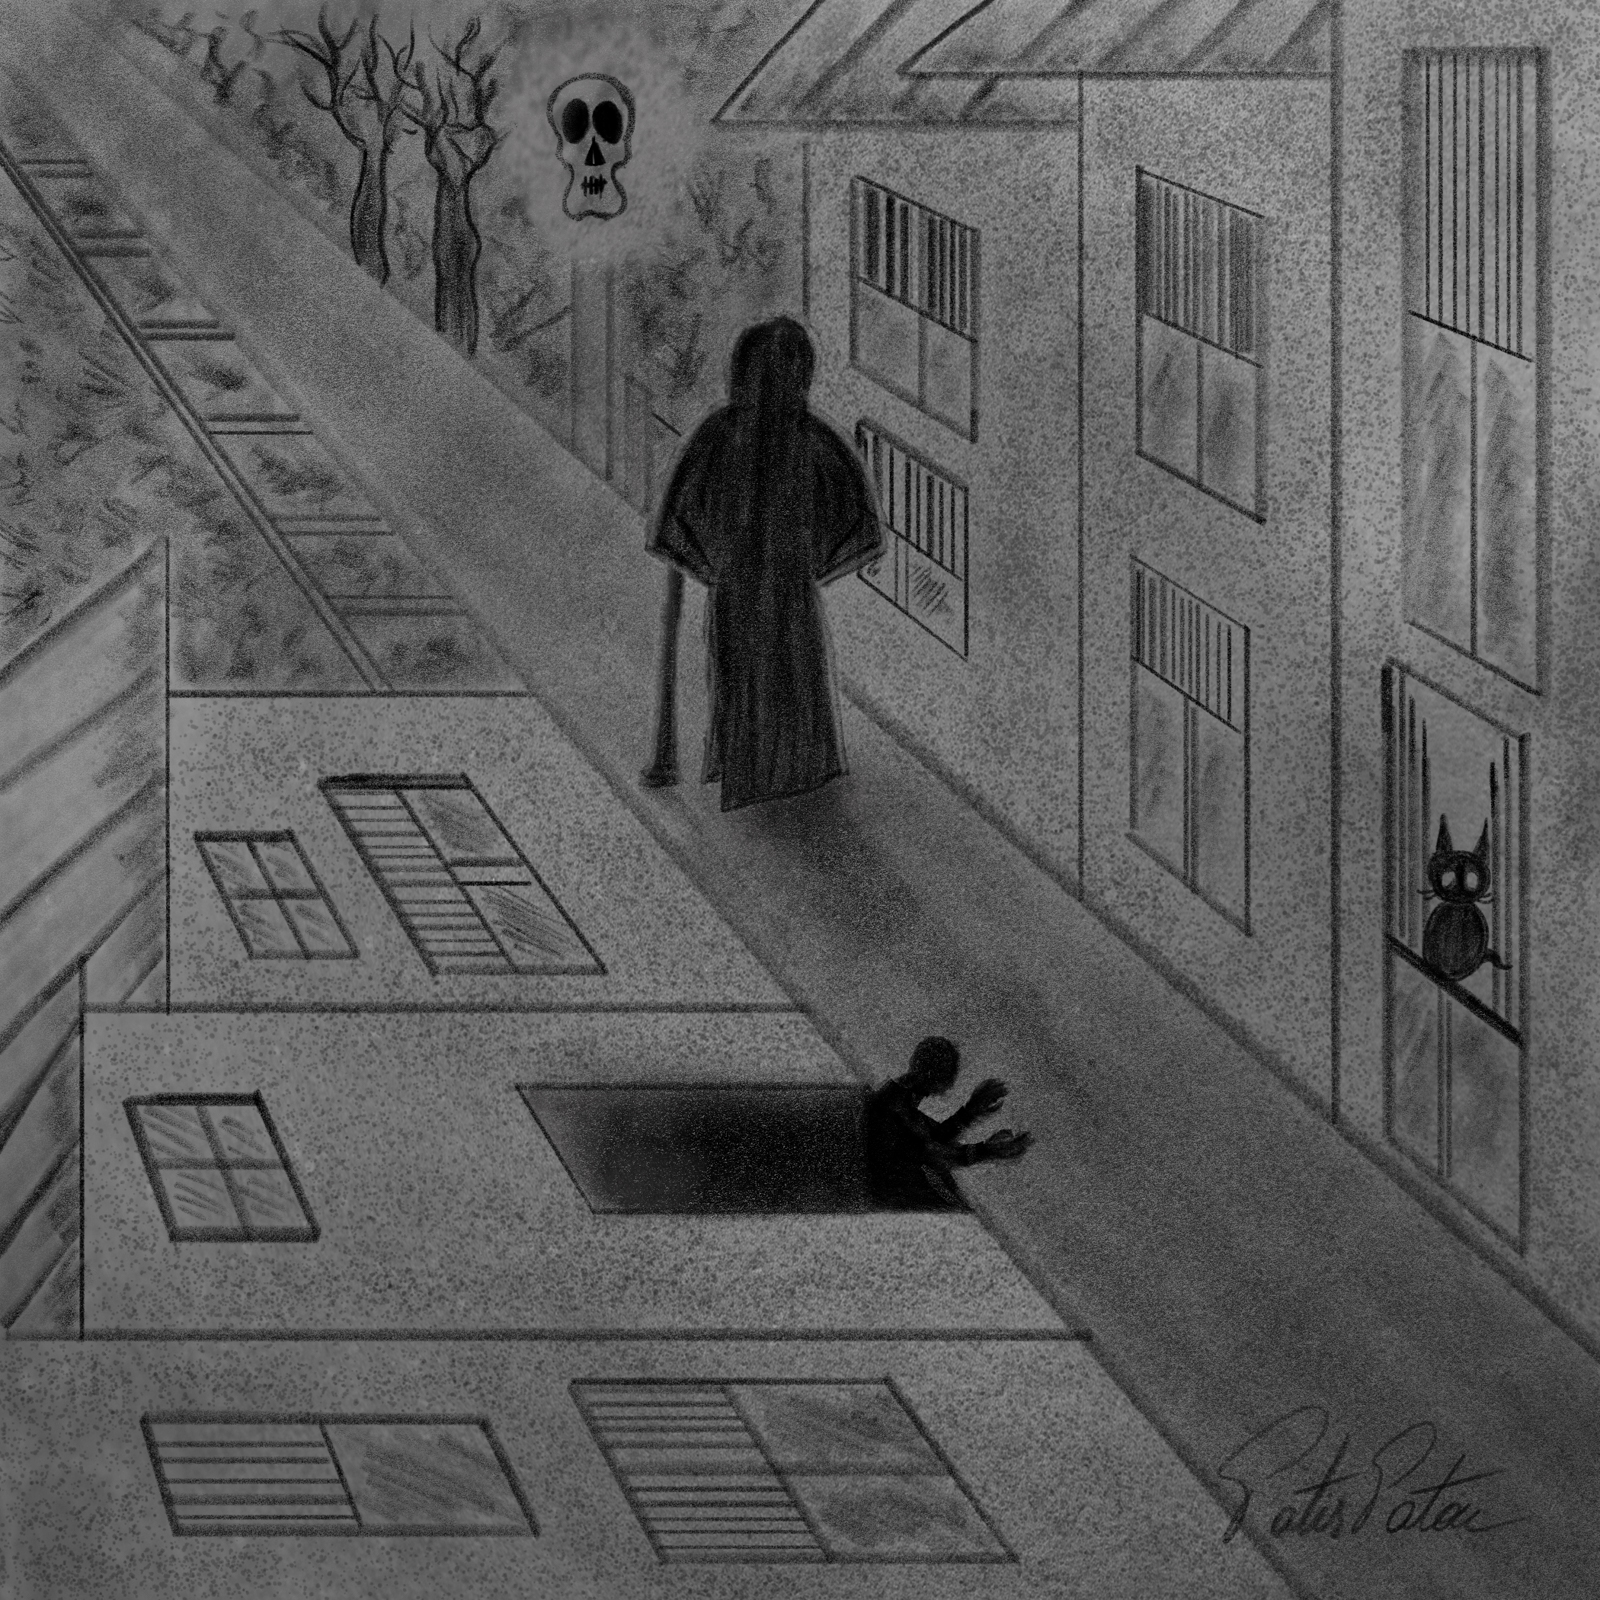 Black and white illustration with a figure in black walking on a dark valley